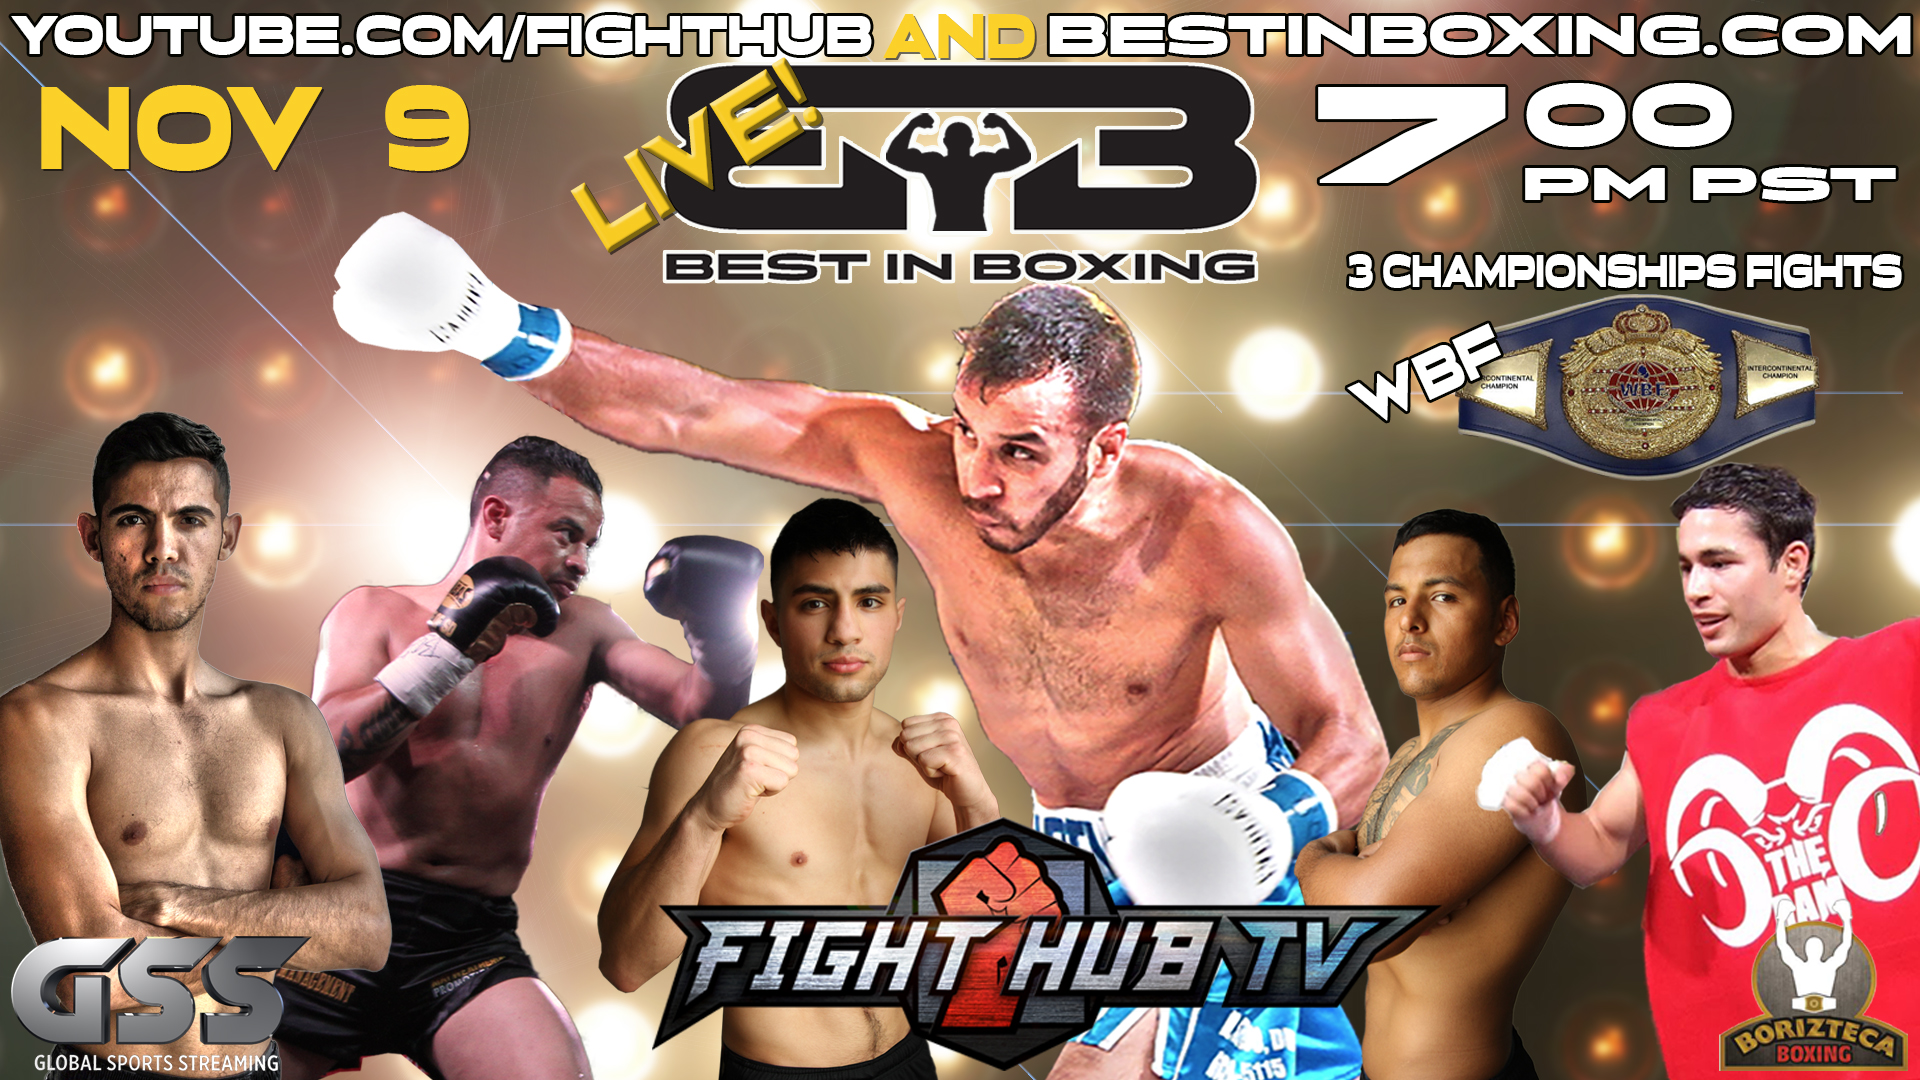 Best in Boxing Live on November 9th on Fight Hub TV and BestinBoxing